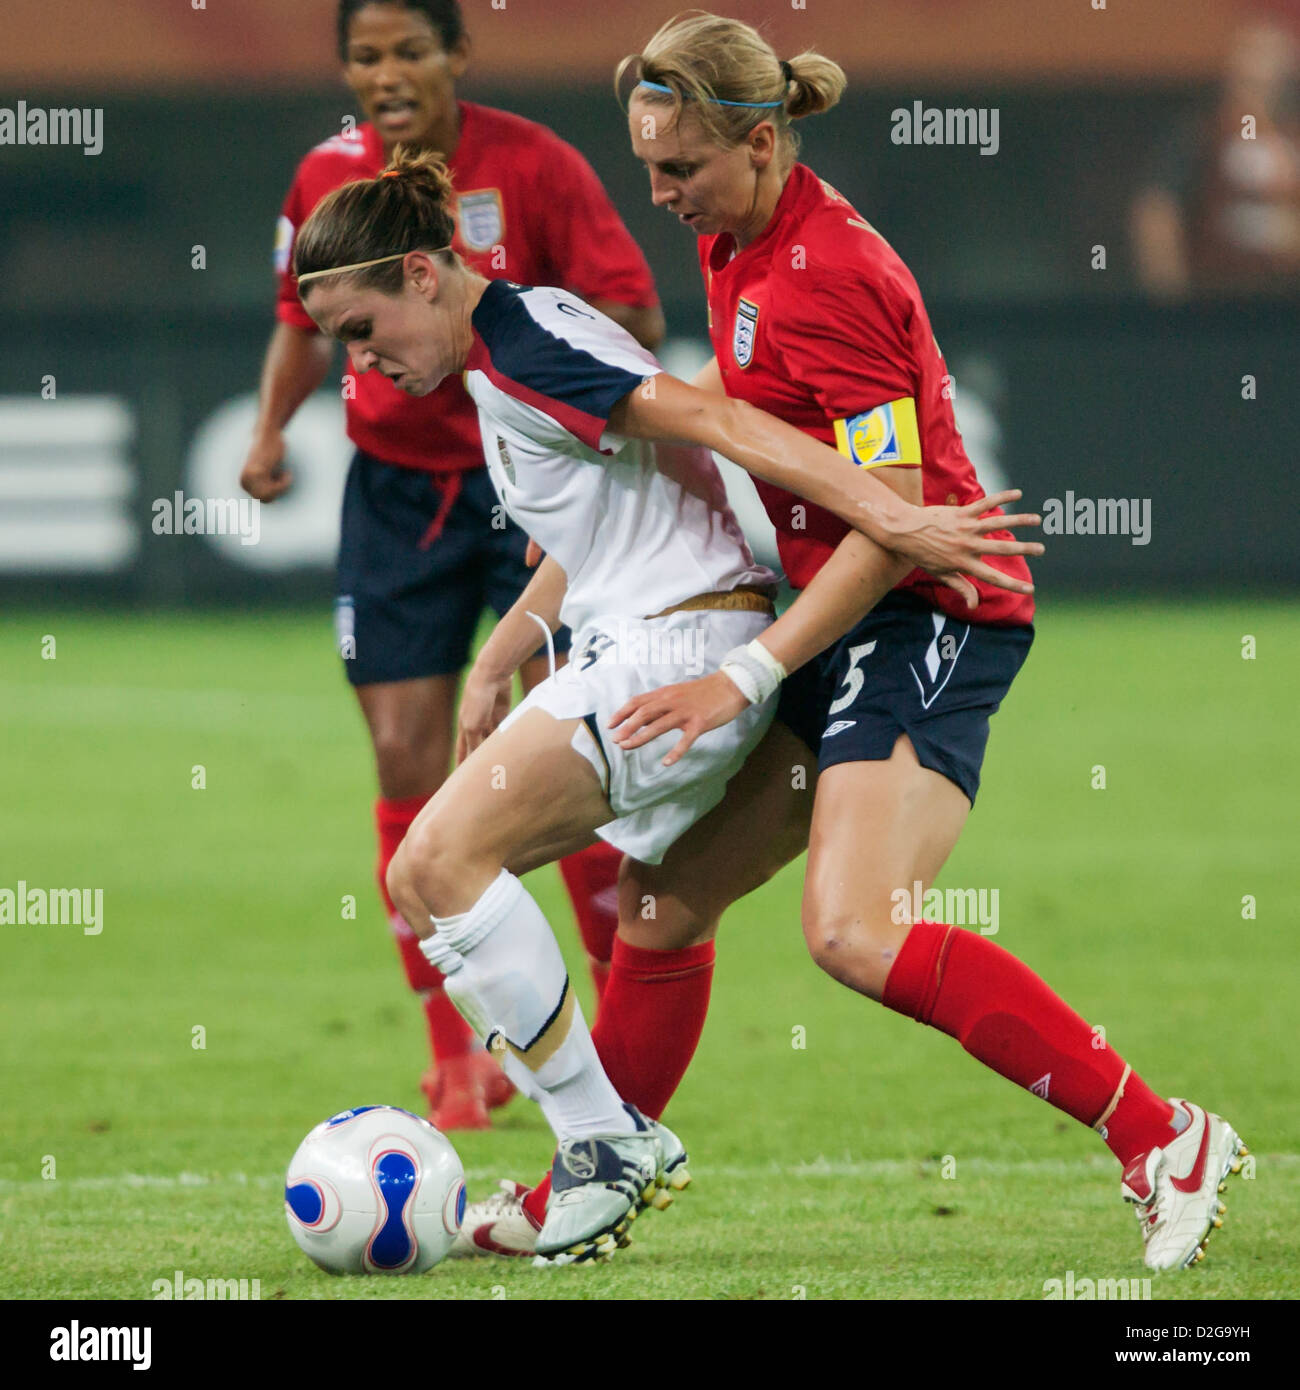 England team captain Faye White (R) defends against Heather O'Reilly of the USA (L) during a FIFA Women's World Cup quarterfinal Stock Photo